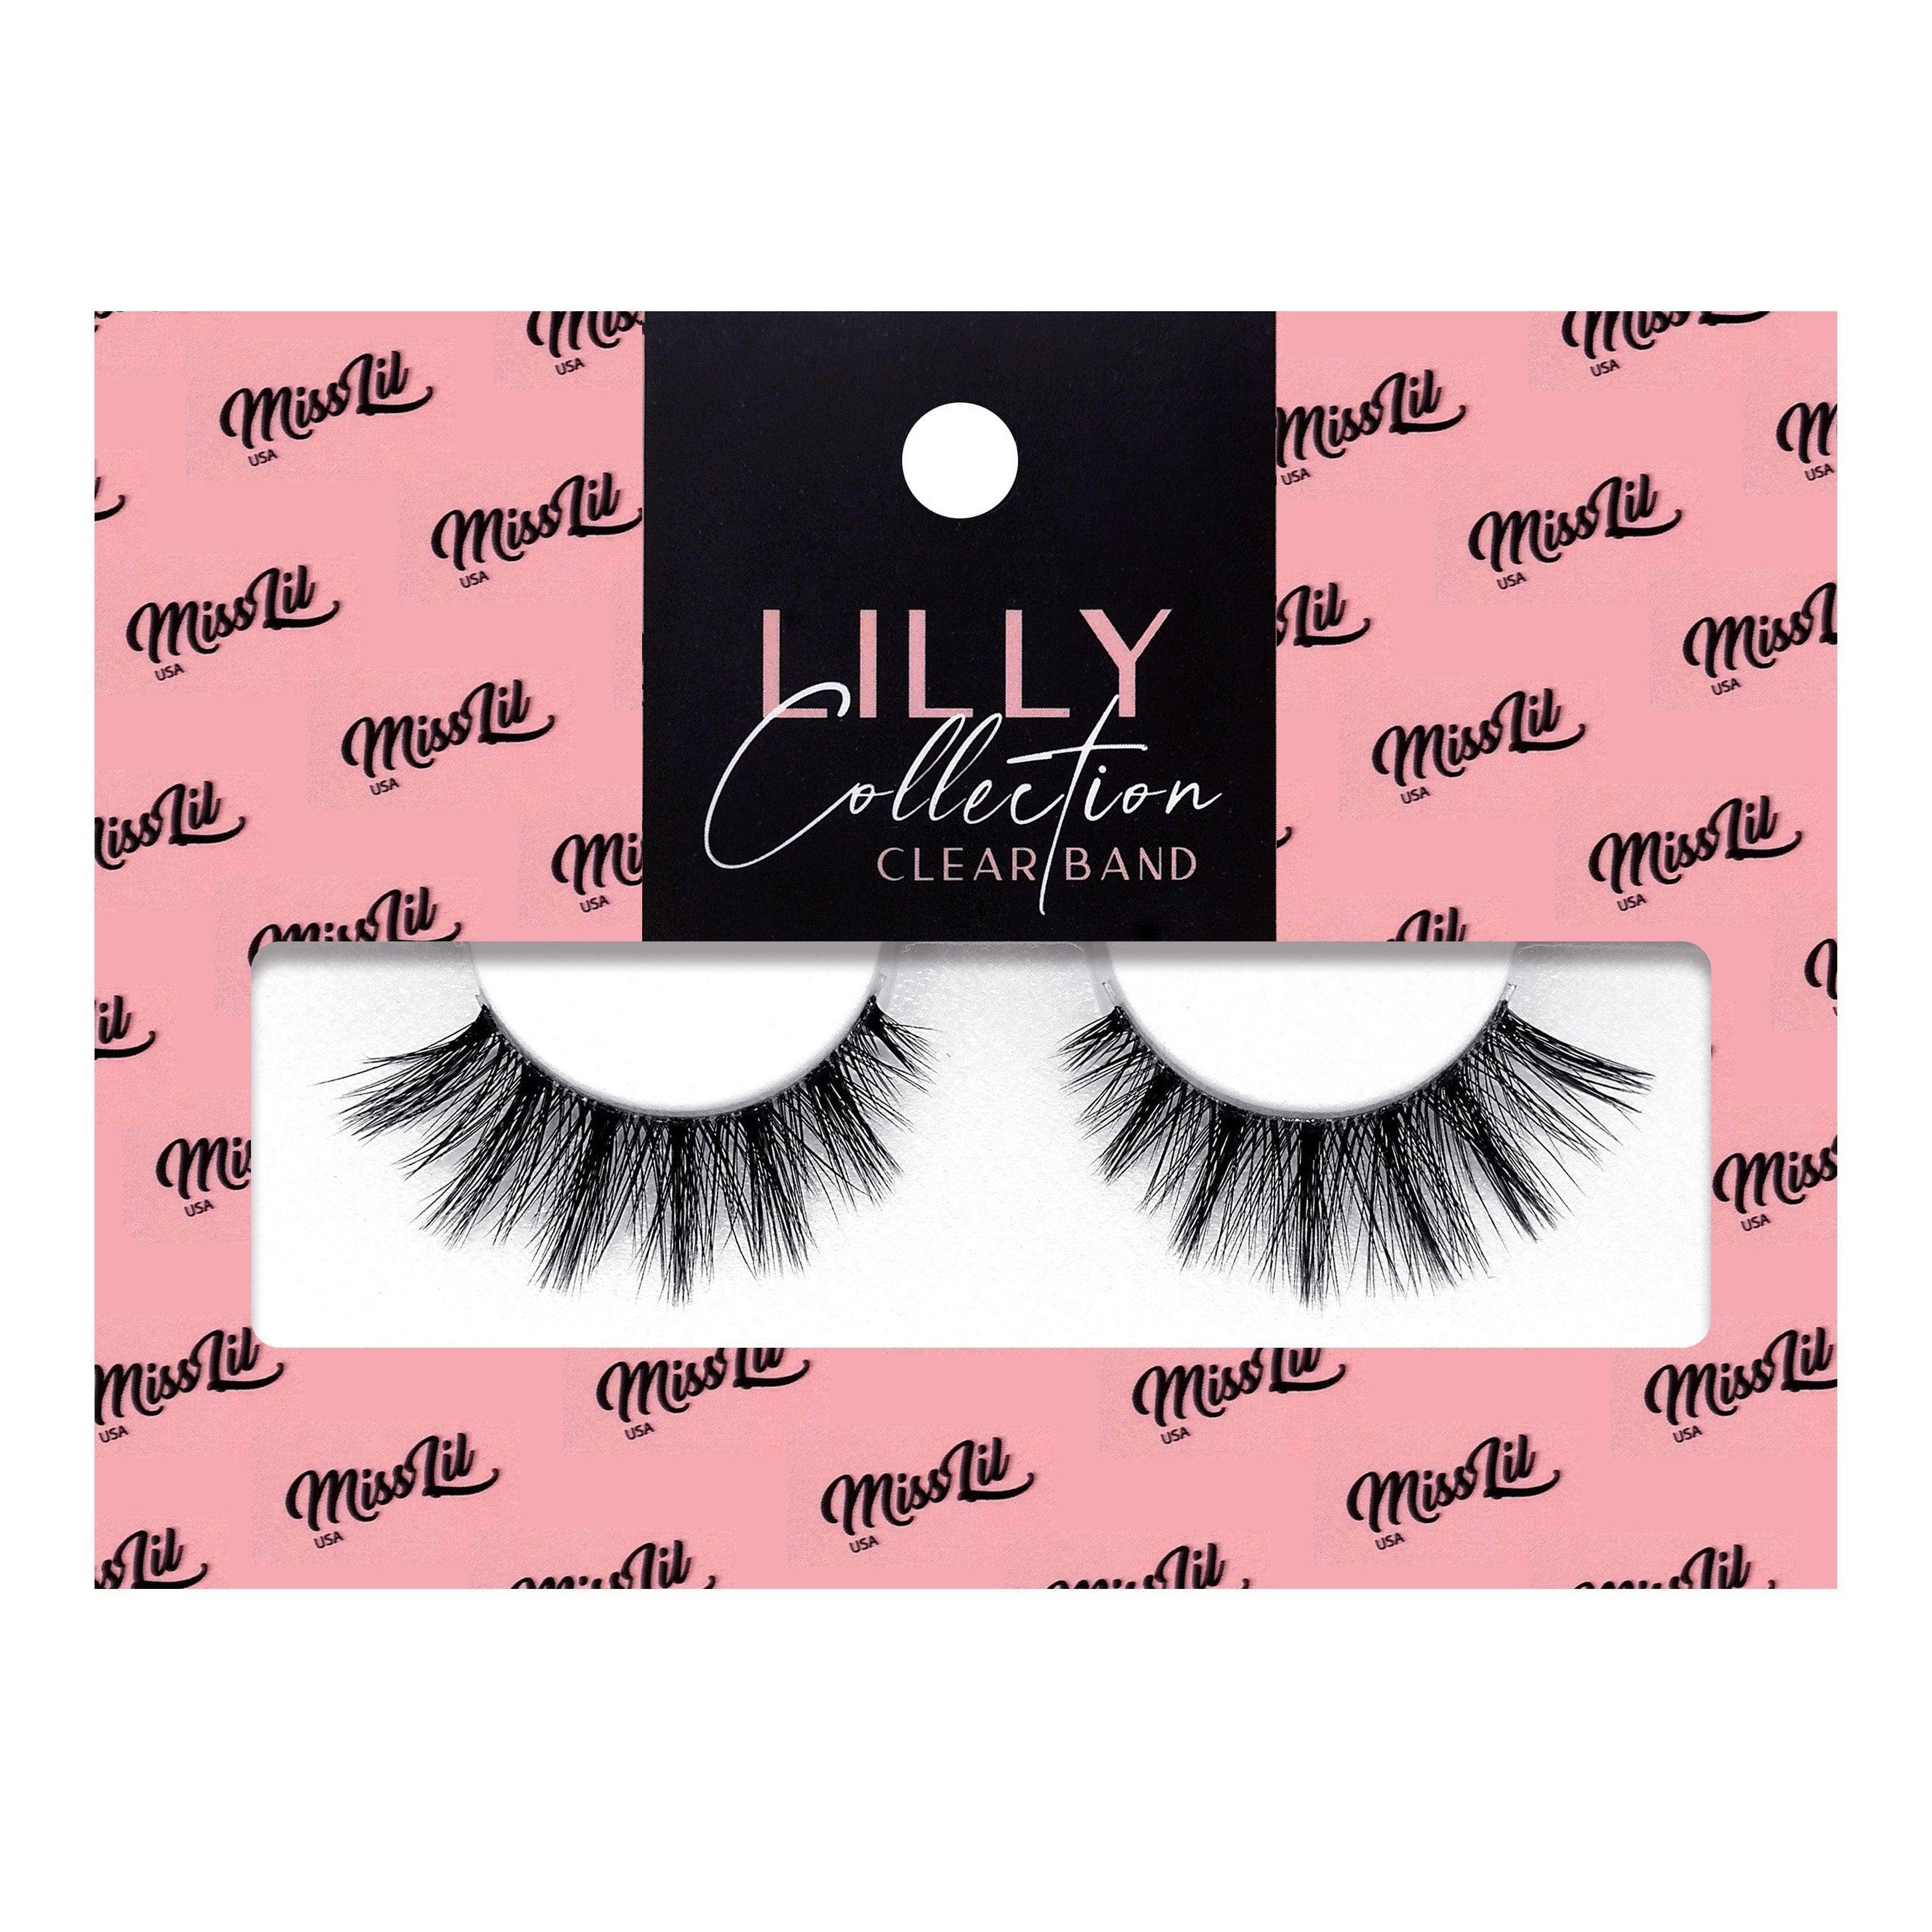 1-Pair Lashes-Lilly Collection #8 (Pack of 12) - Miss Lil USA Wholesale